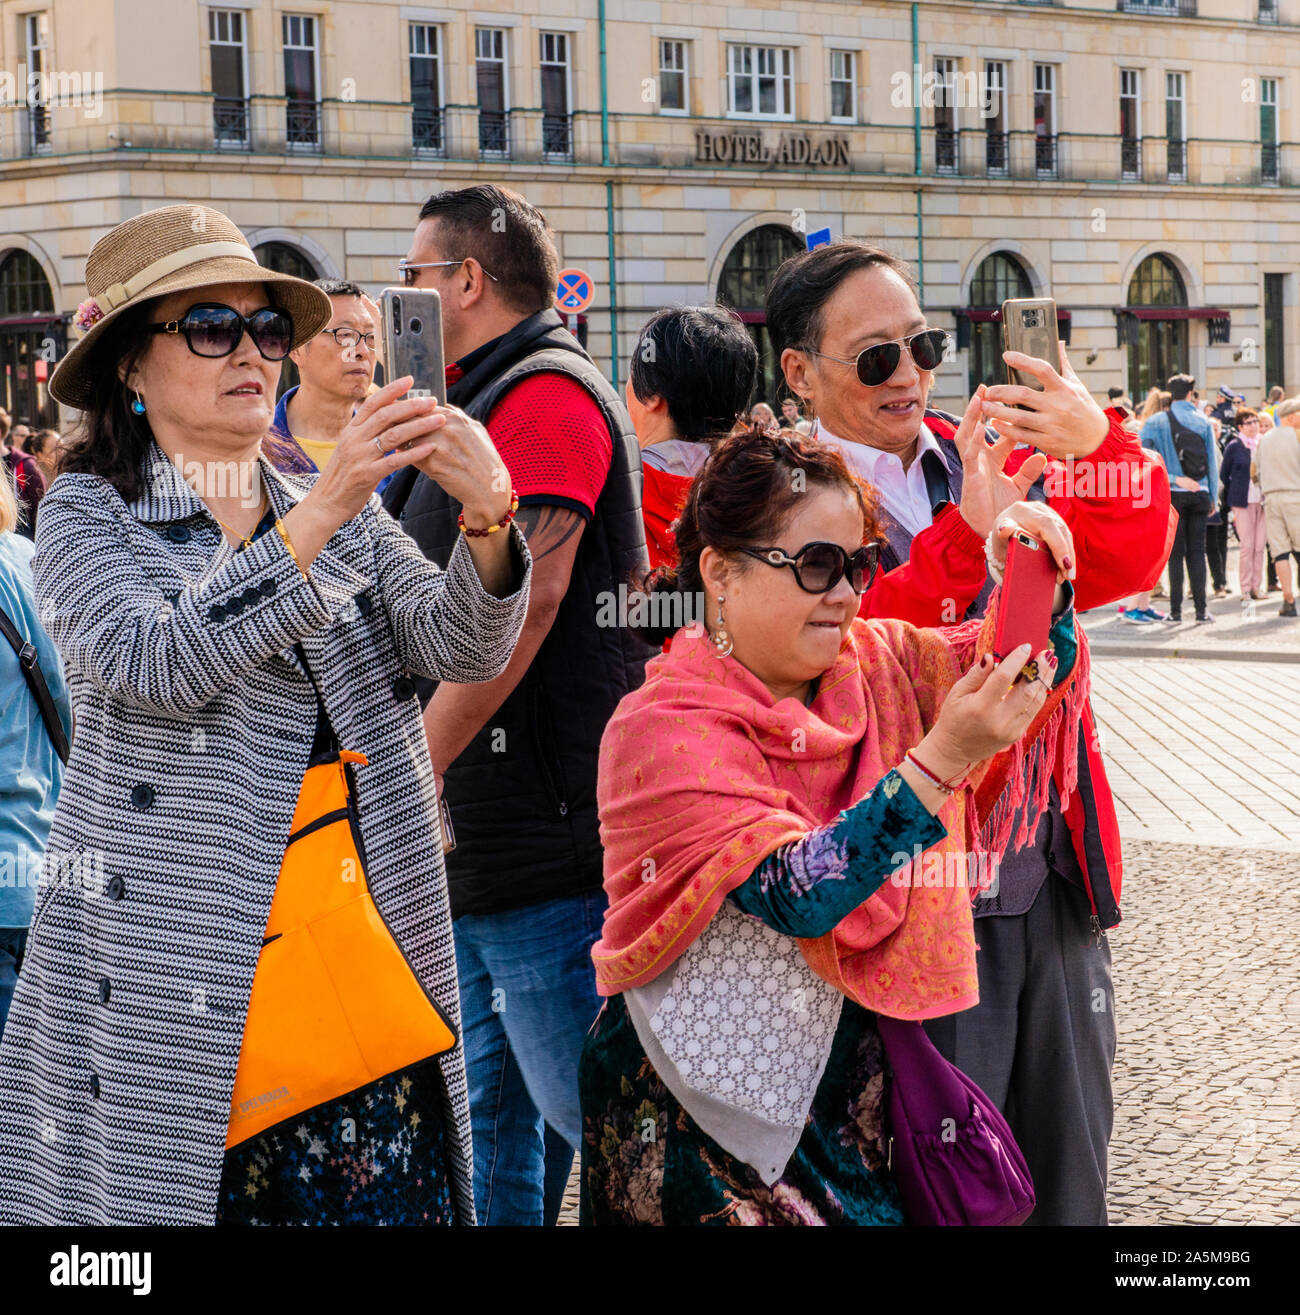 Tourists taking photograph in garden, Bundestag, Berlin, Germany Stock Photo